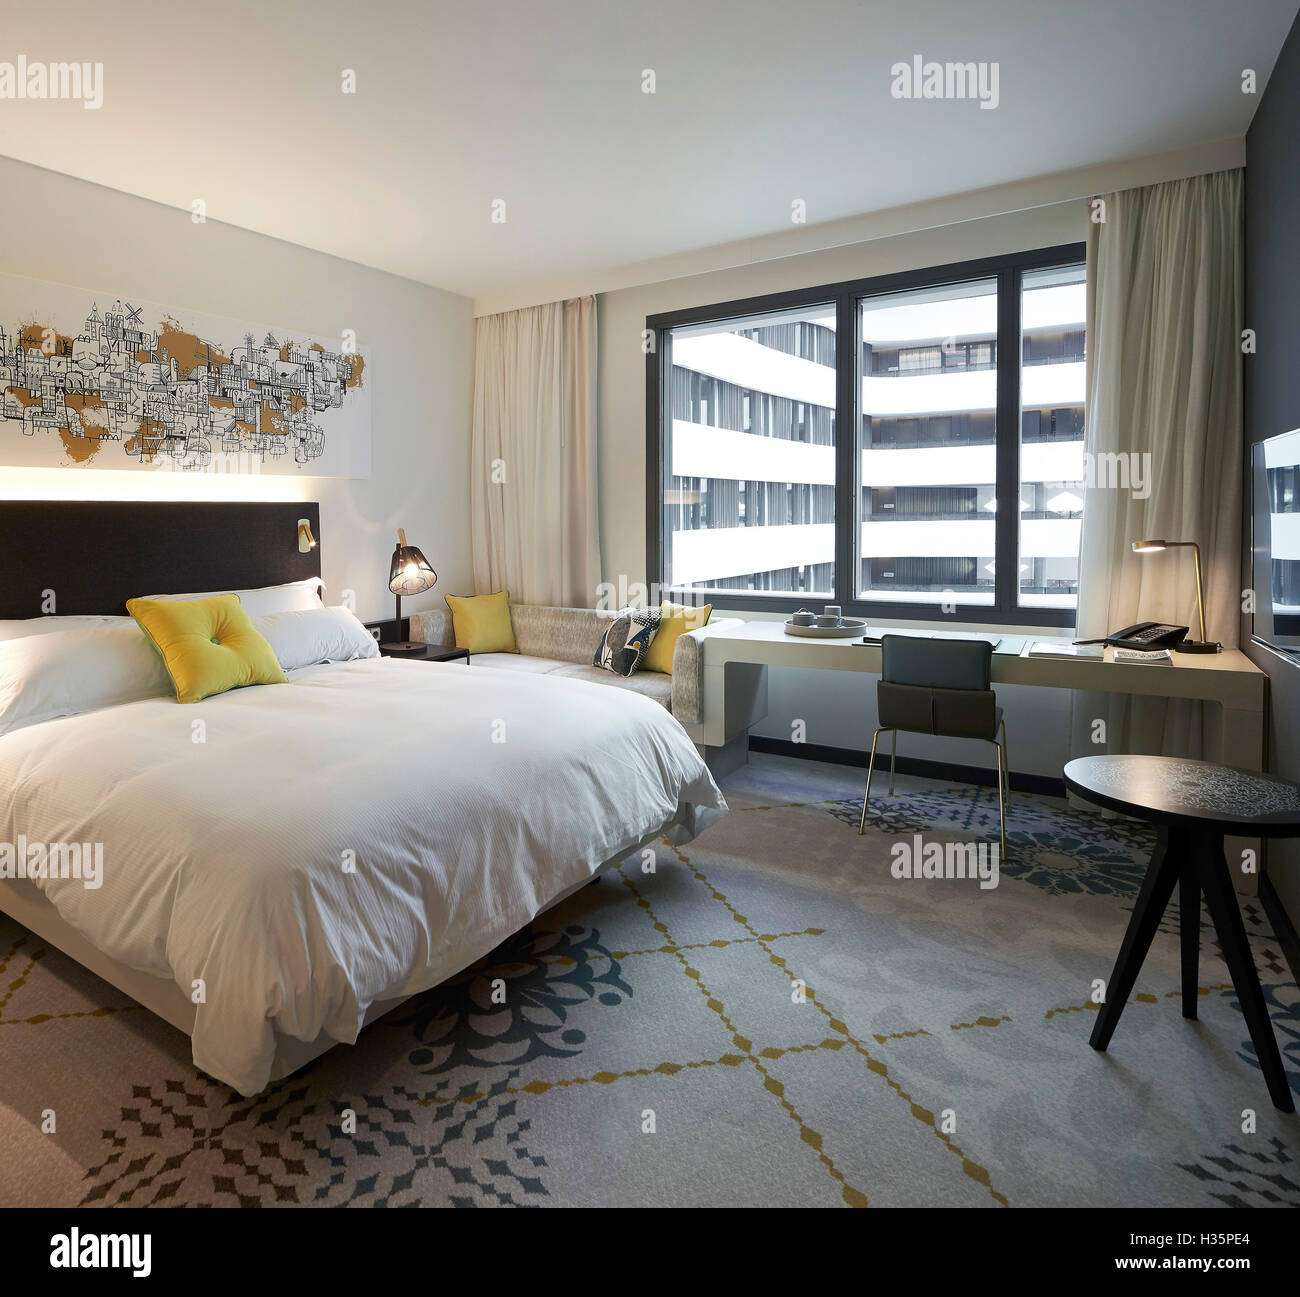 Bedroom with view to atrium. Hilton Amsterdam Airport Schiphol, Amsterdam, Netherlands. Architect: Mecanoo Architects, 2015. Stock Photo